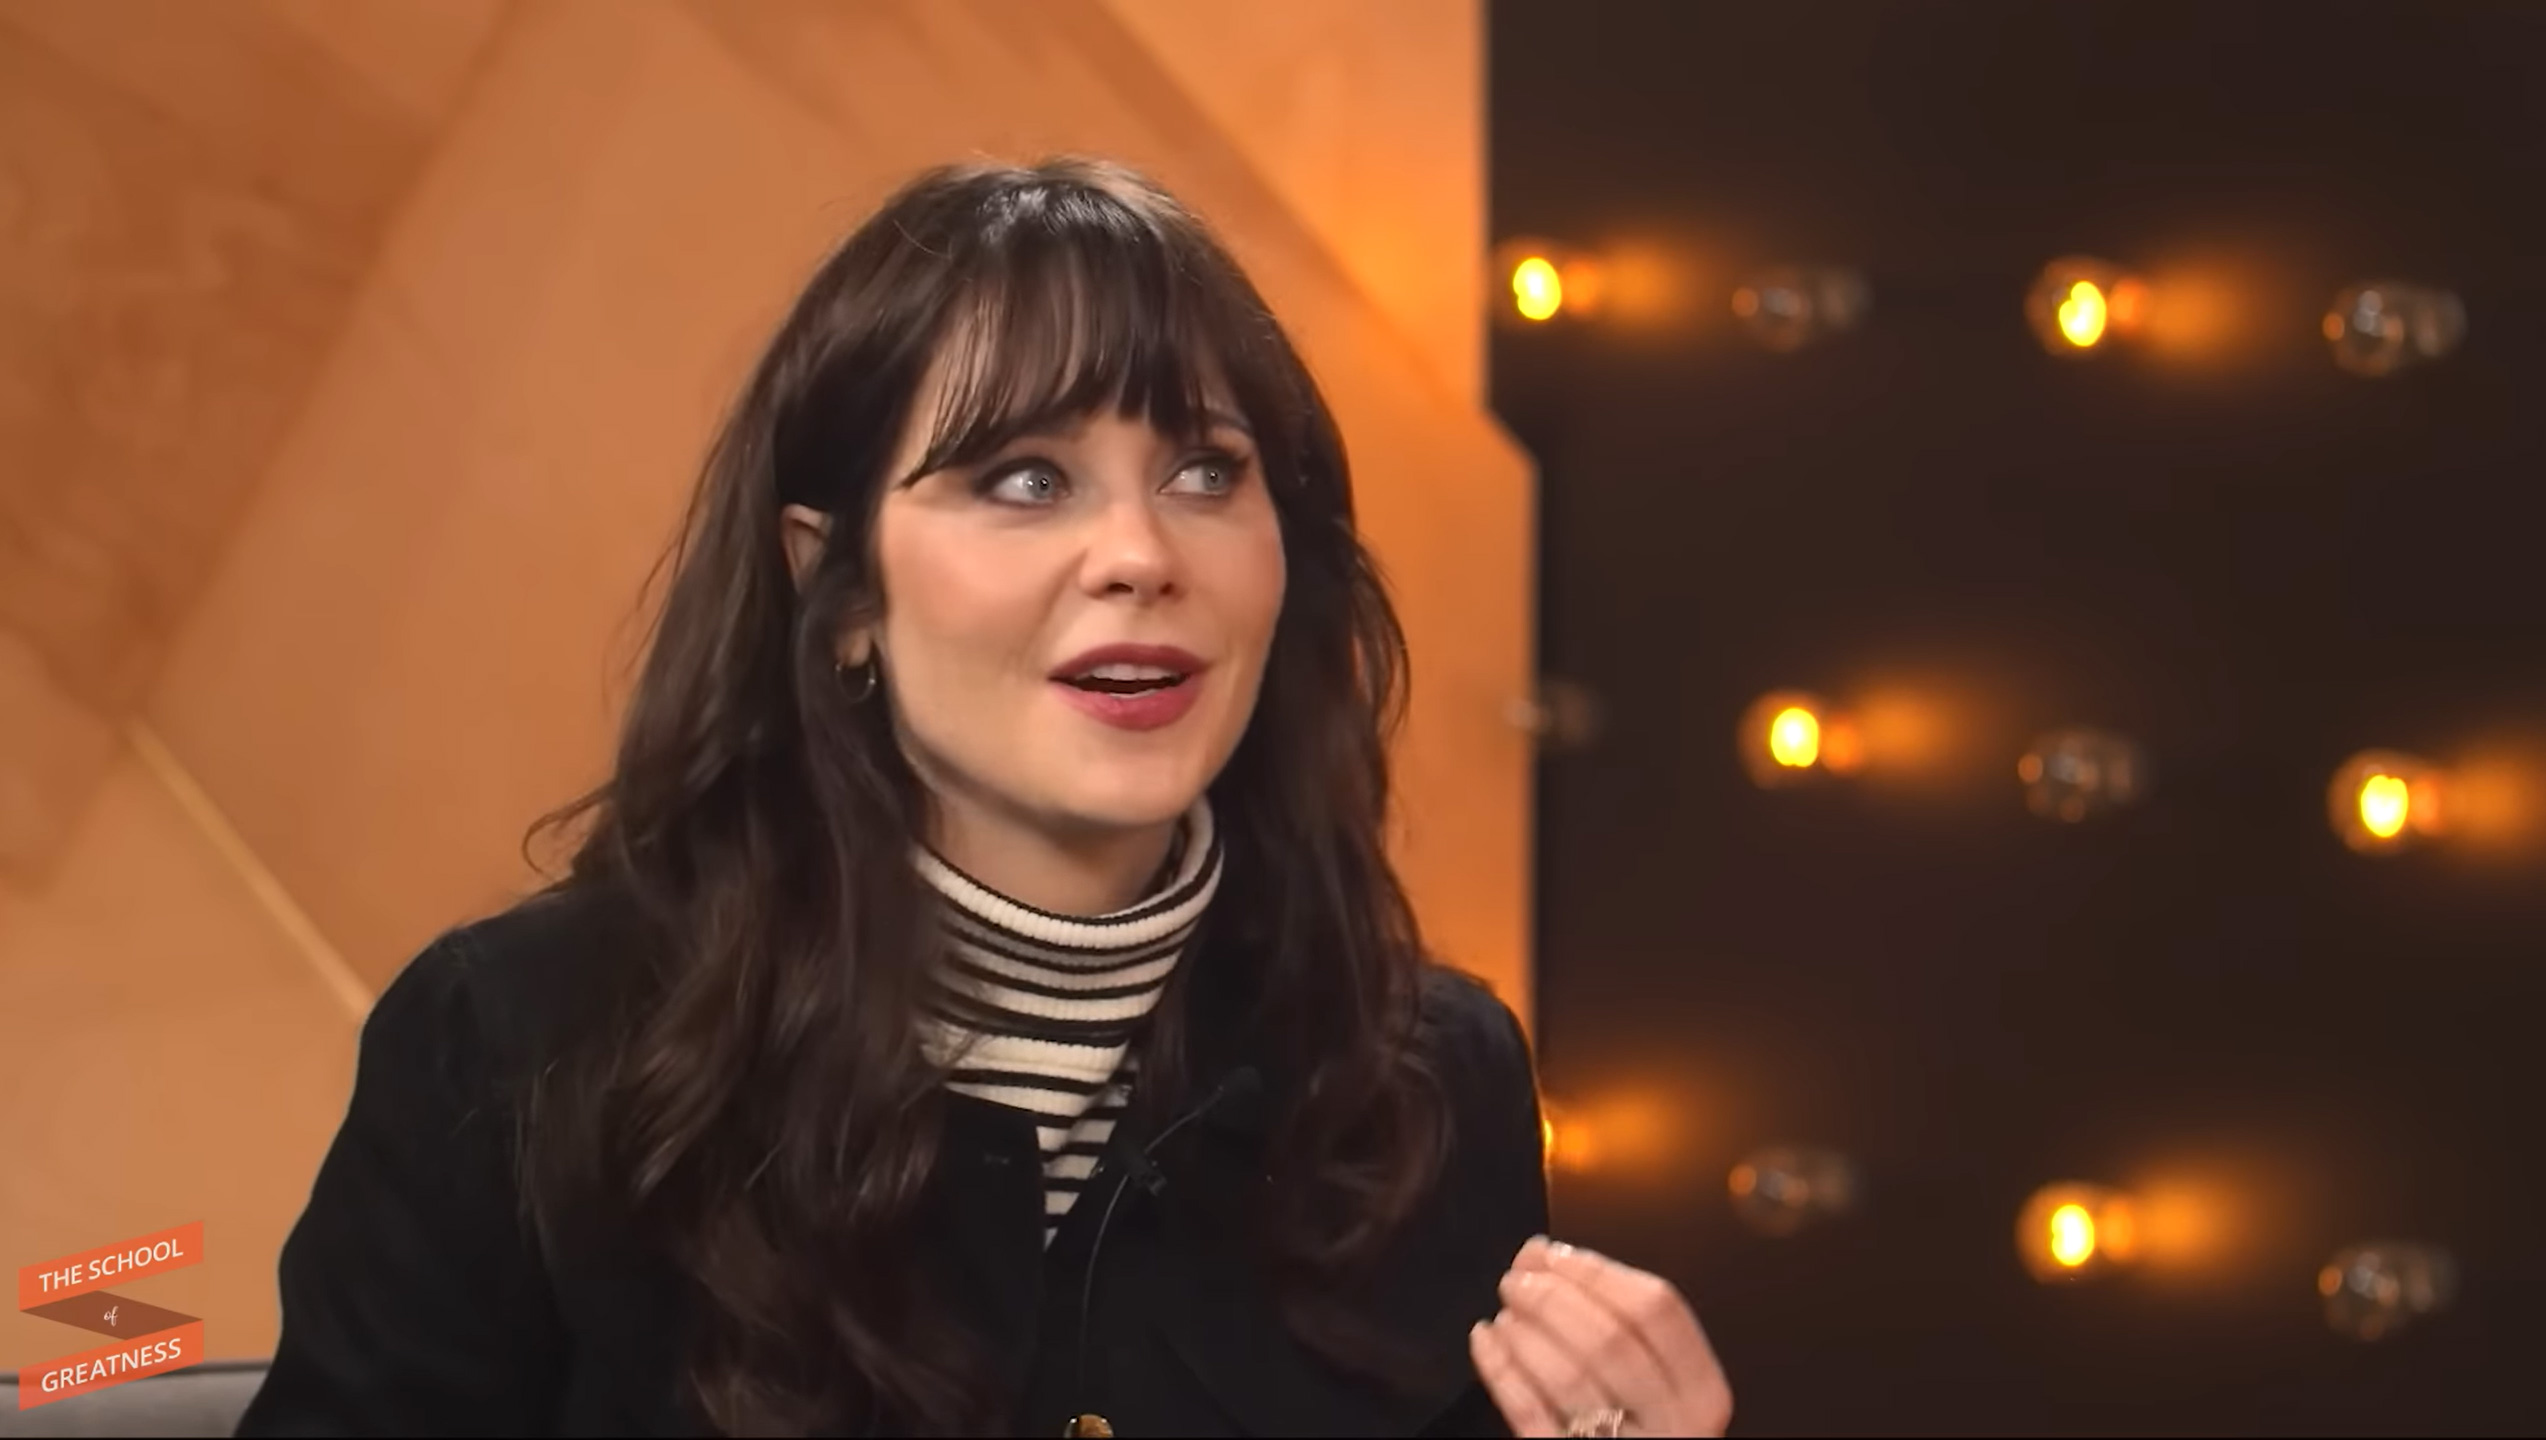 Zooey spoke out against the nepotism claims during a recent interview on The School of Greatness podcast hosted by Lewis Howes